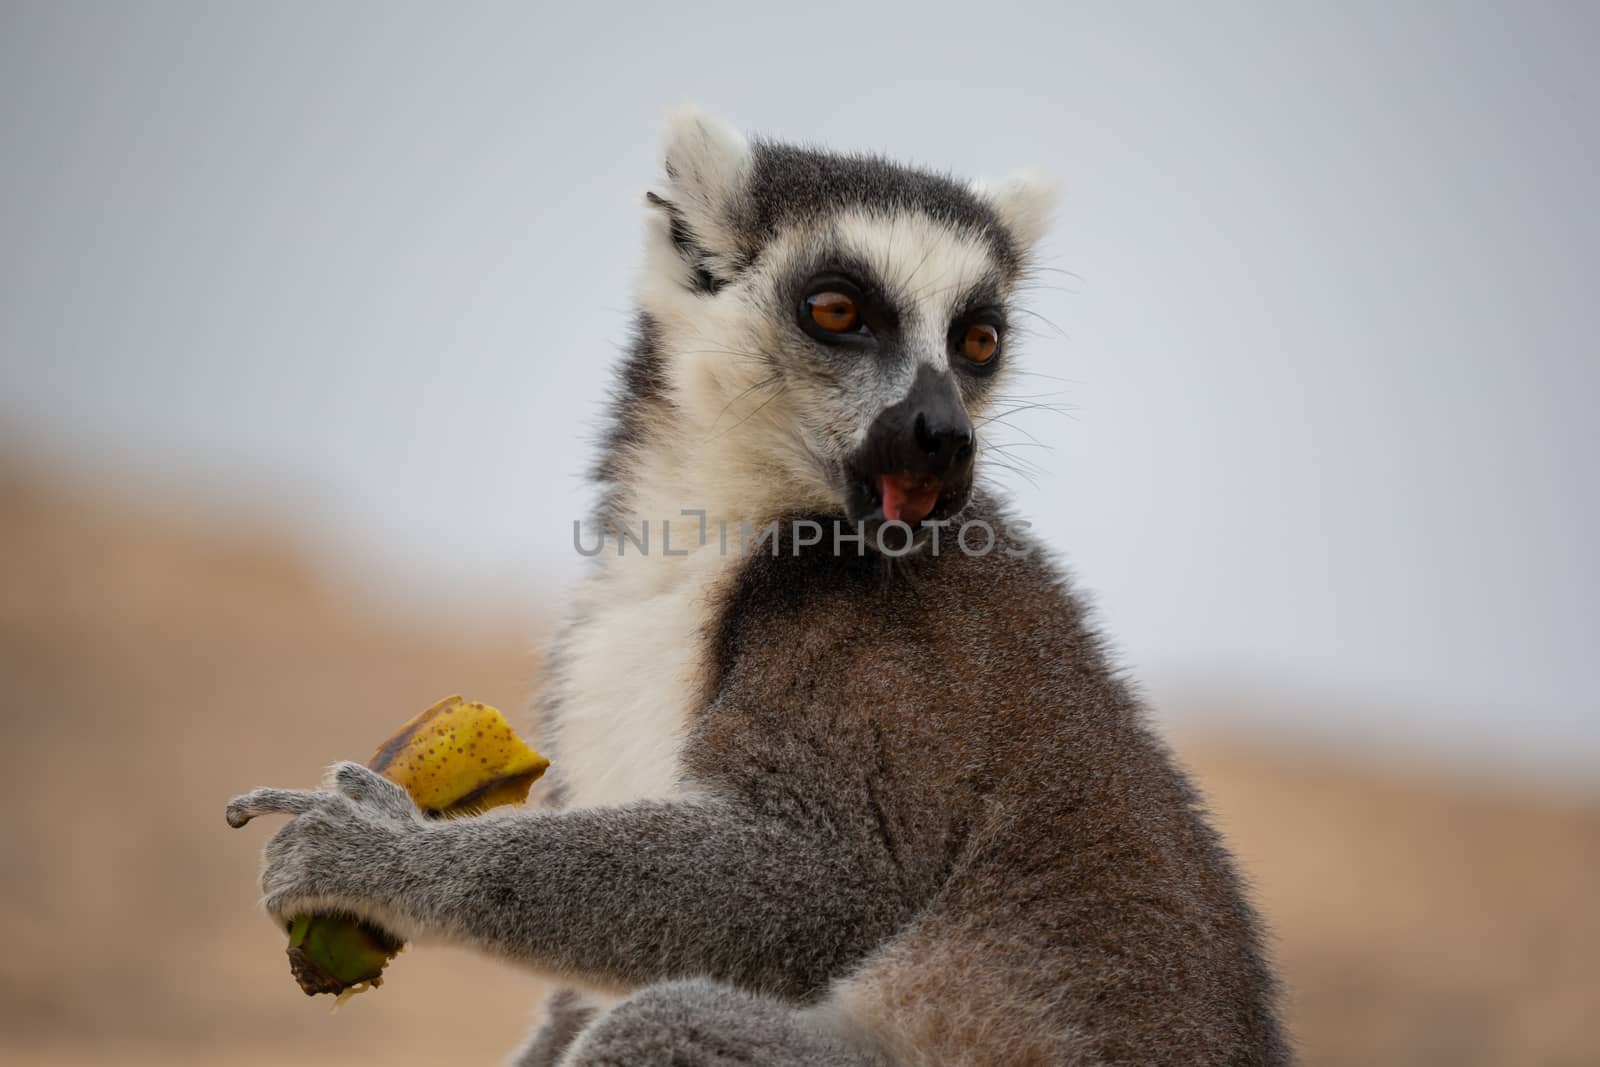 A ring-tailed lemur with a banana in close-up by 25ehaag6